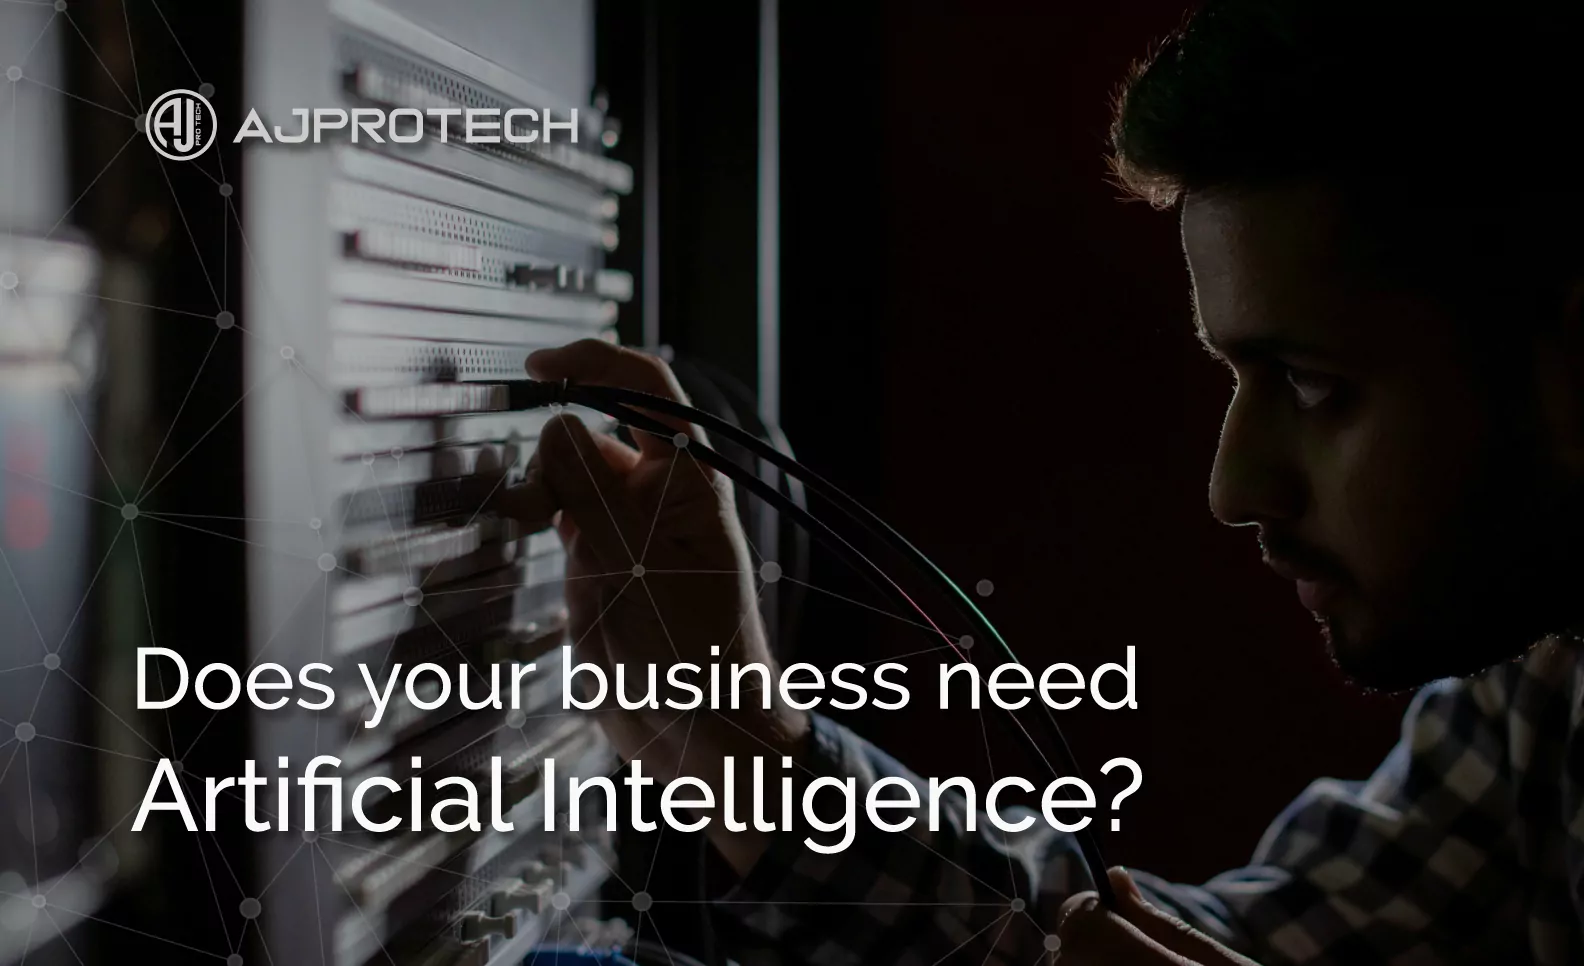 DOES YOUR BUSINESS NEED ARTIFICIAL INTELLIGENCE